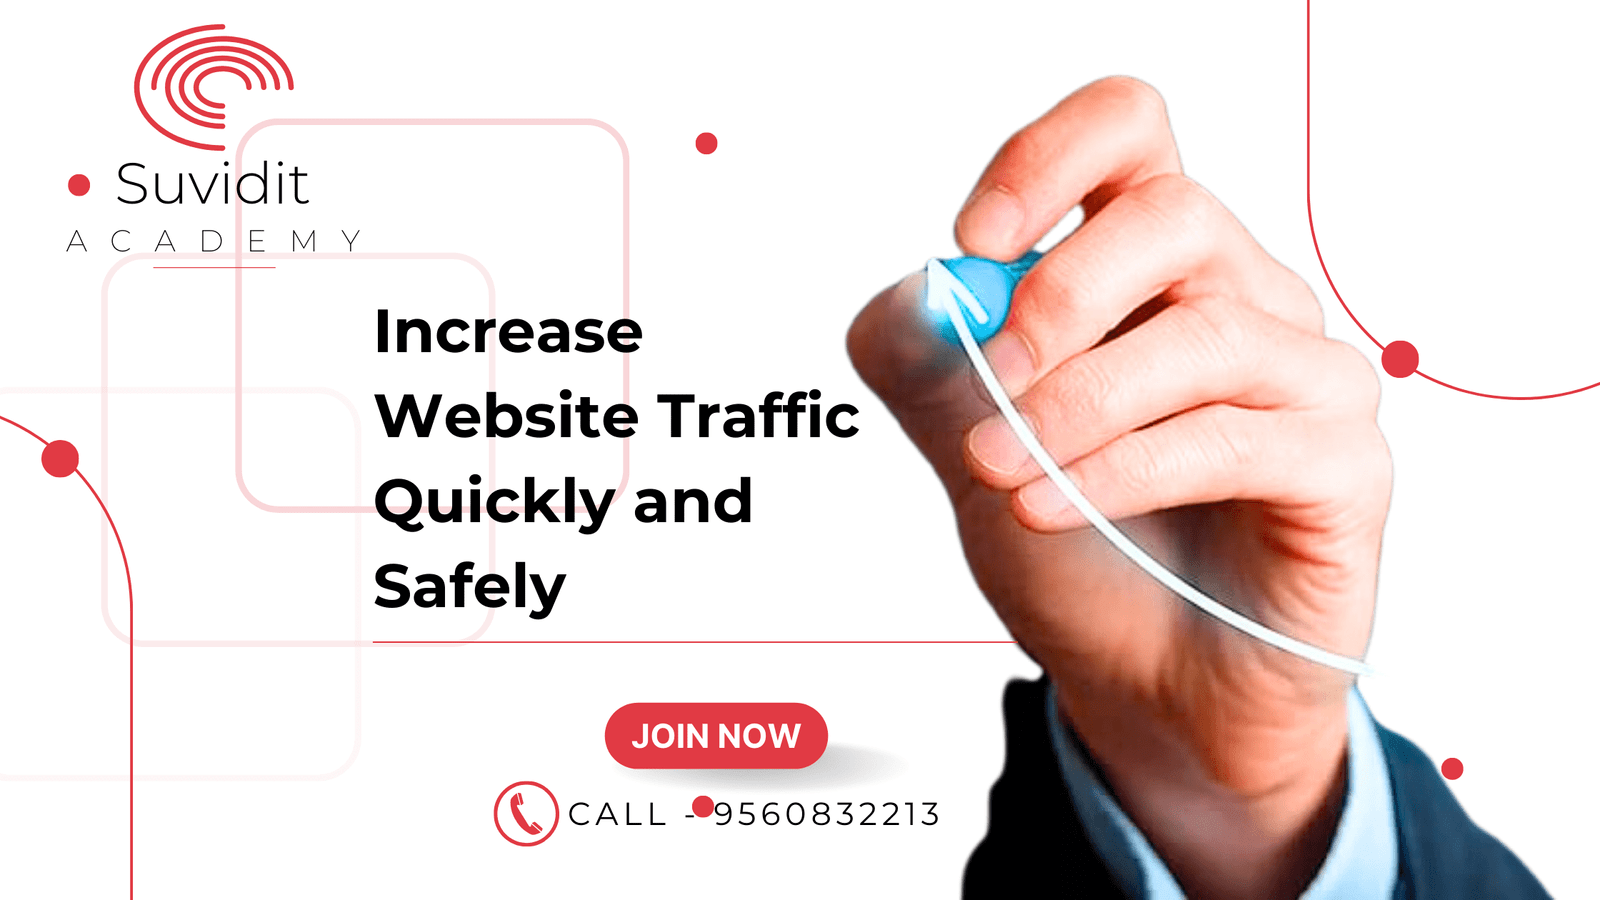 Increase Website Traffic Quickly and Safely